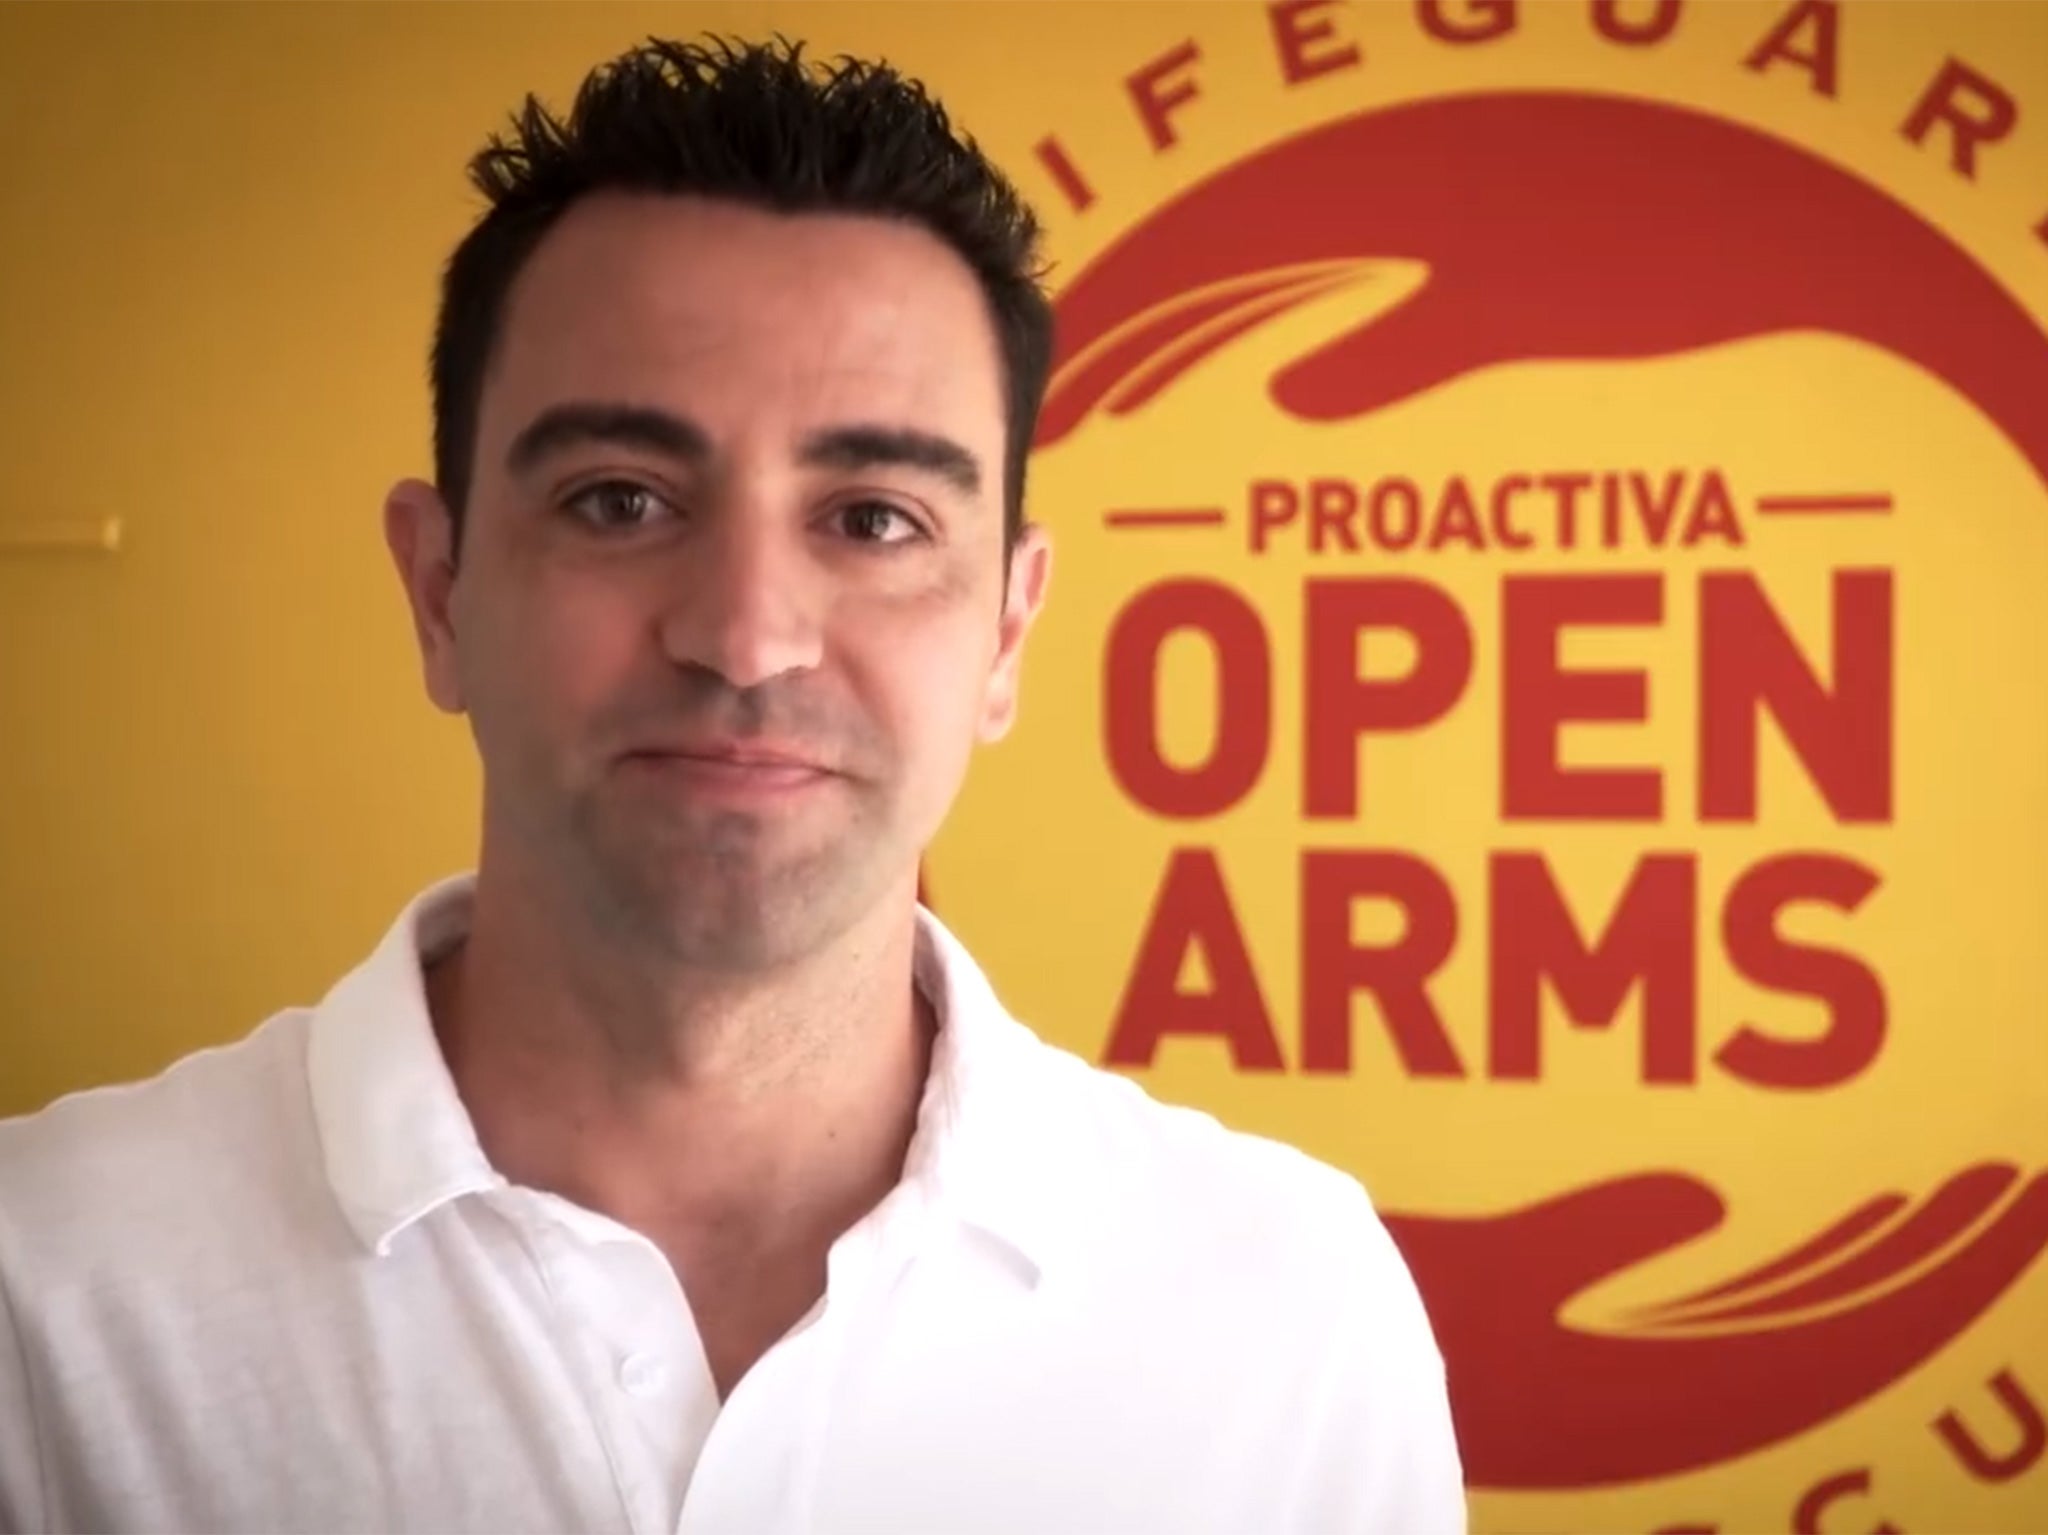 Xavi, speaking in a video message for Proactivia Open Arms